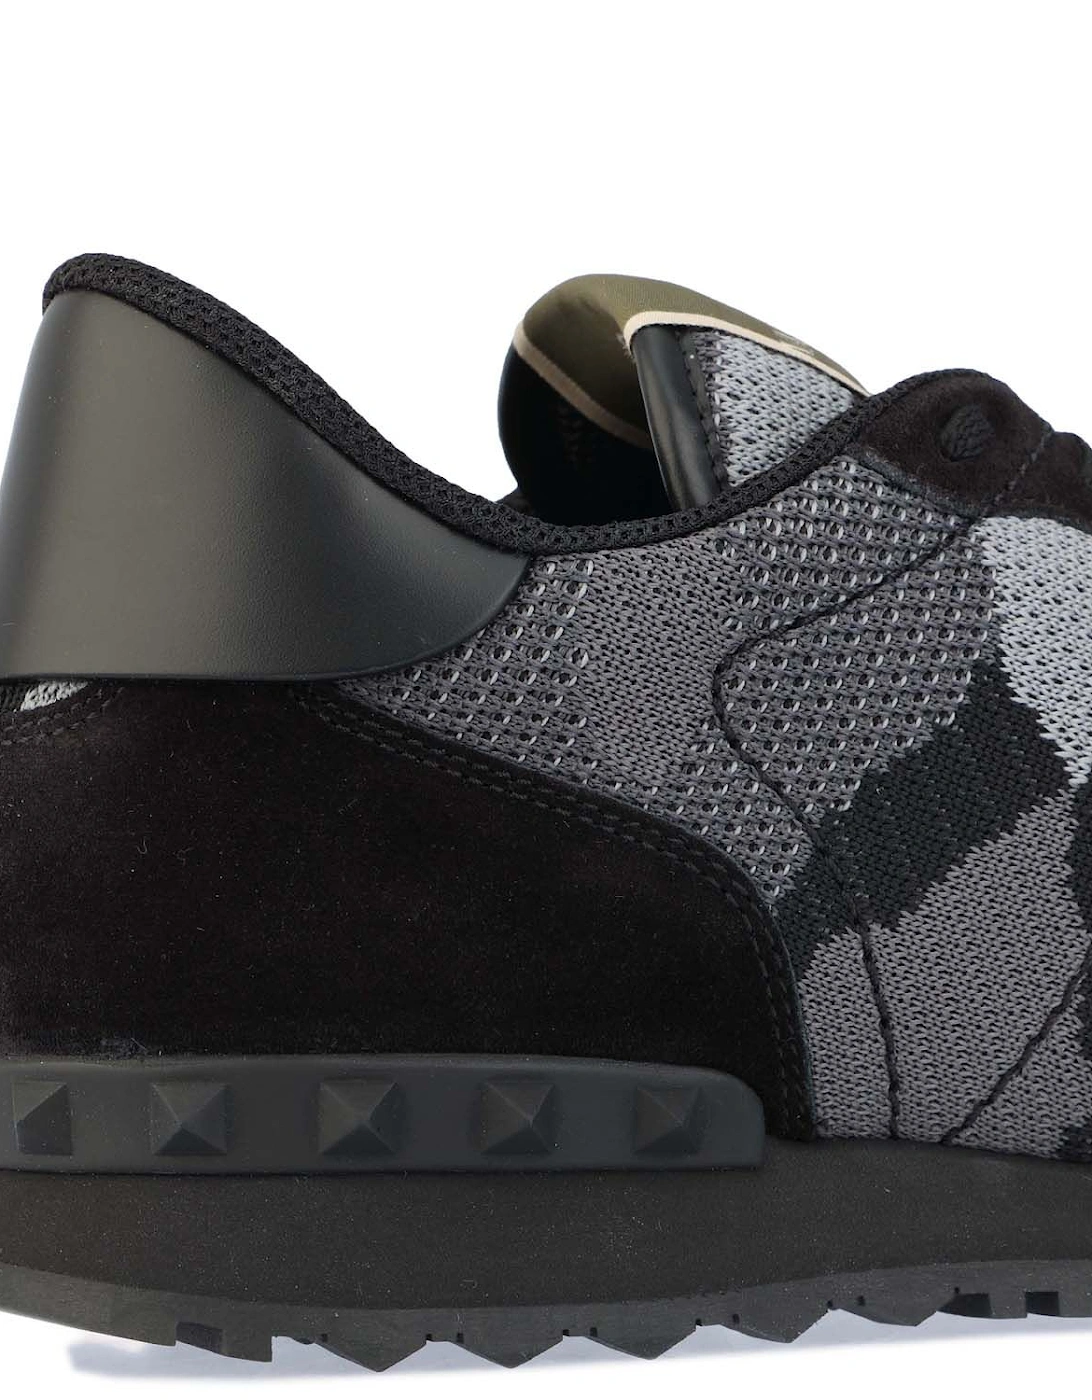 Mens Rockstud Camouflage Trainers